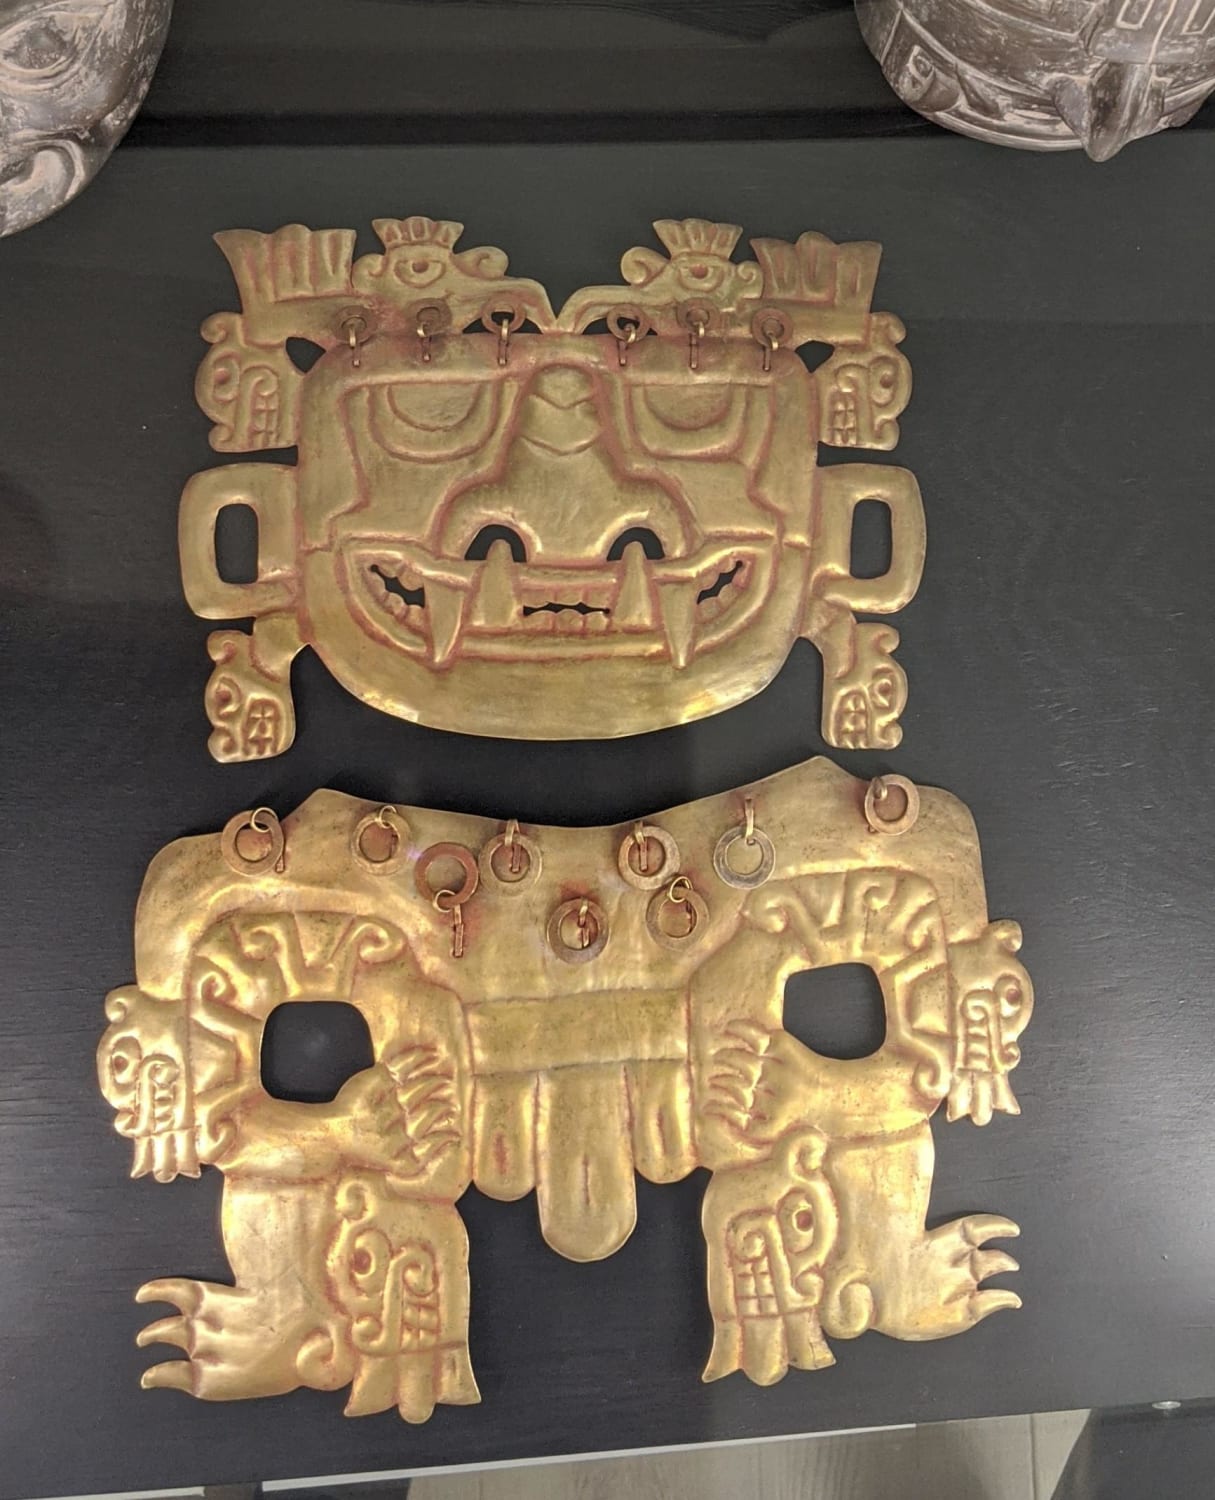 God of the underworld - native gold, chasing, cinnabar coloring. Mexico, 1500-1200 BC.